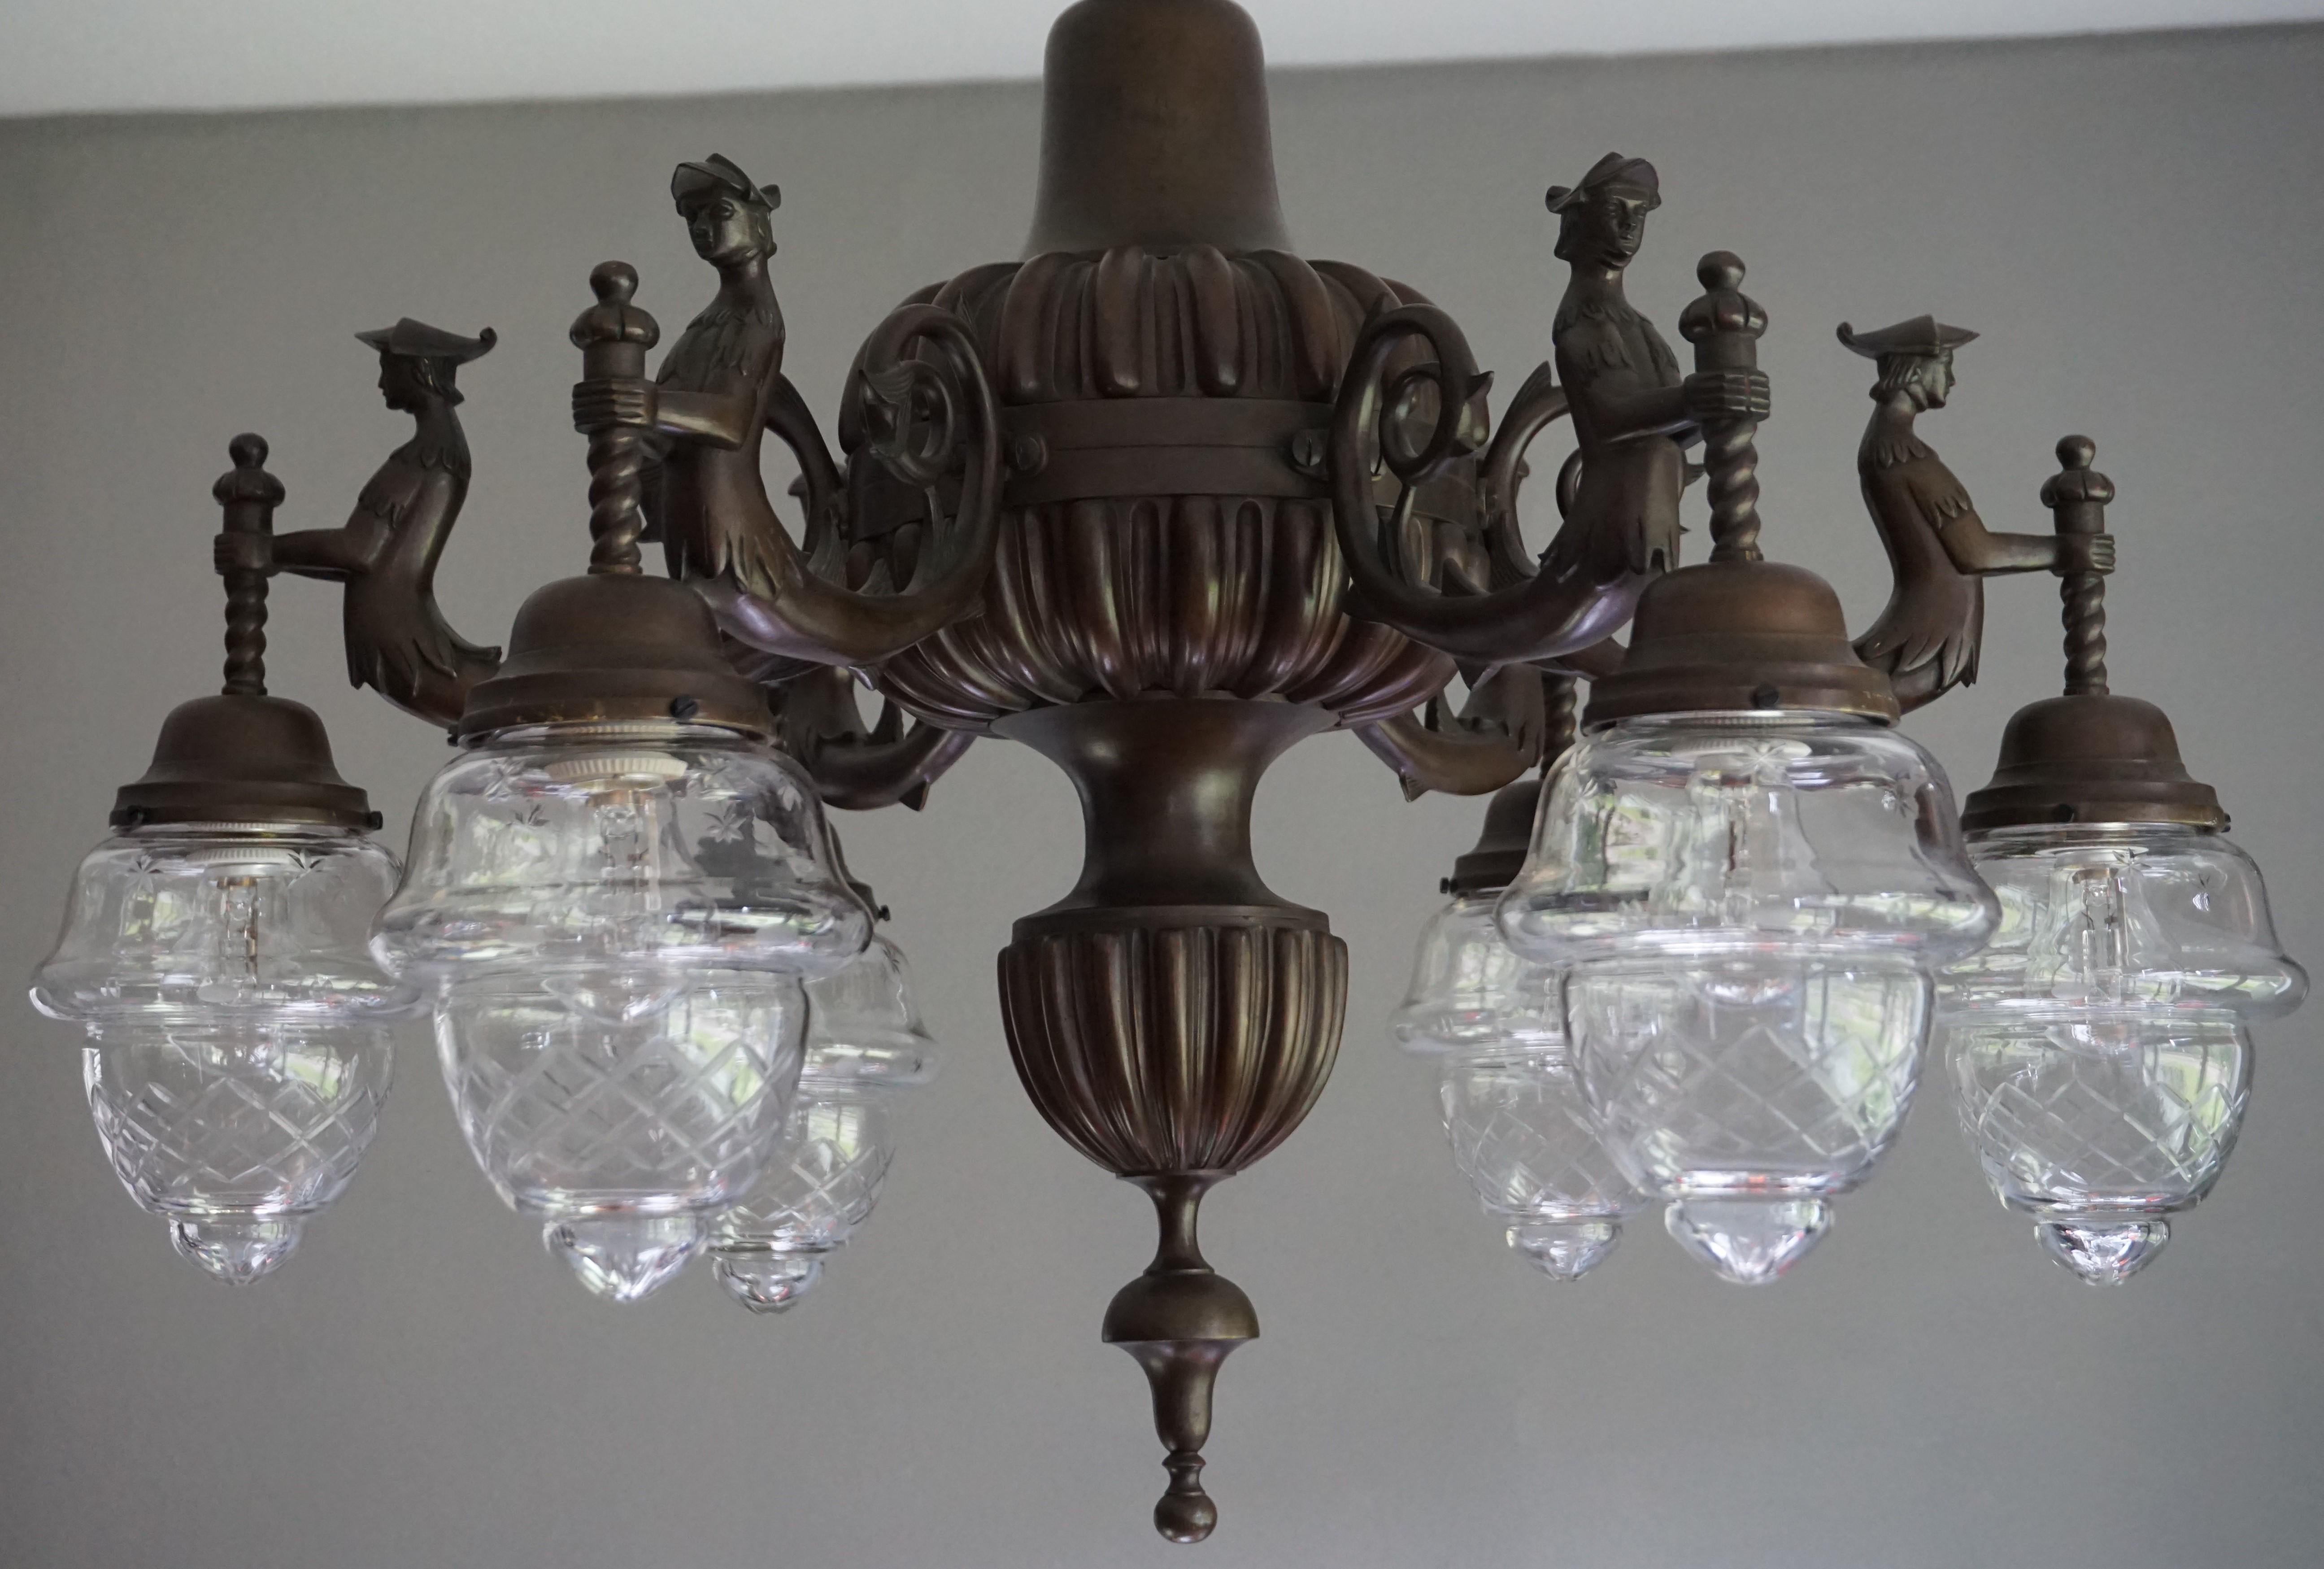 Amazing quality and excellent condition, heavy bronze chandelier.

This early 1900s and all handcrafted bronze chandelier is of amazing quality and highly decorative at the same time. We don't know the actual meaning of these templar or Robin